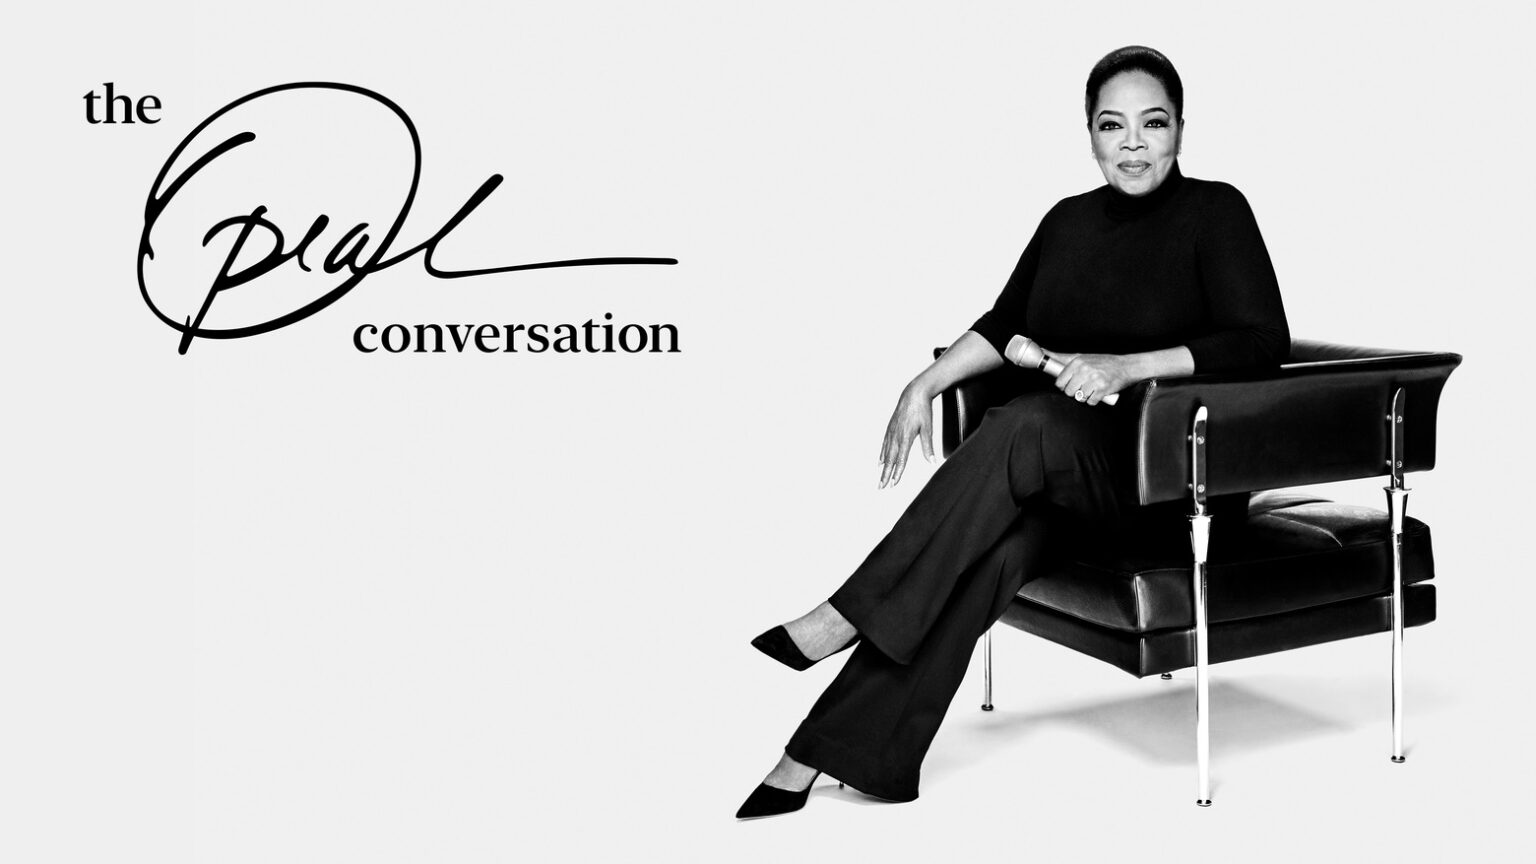 Oprah Winfrey interviews thought leaders in an Apple TV+ series debuting Thursday, July 30. ‘The Oprah Conversation’ hits Apple TV+ this week.